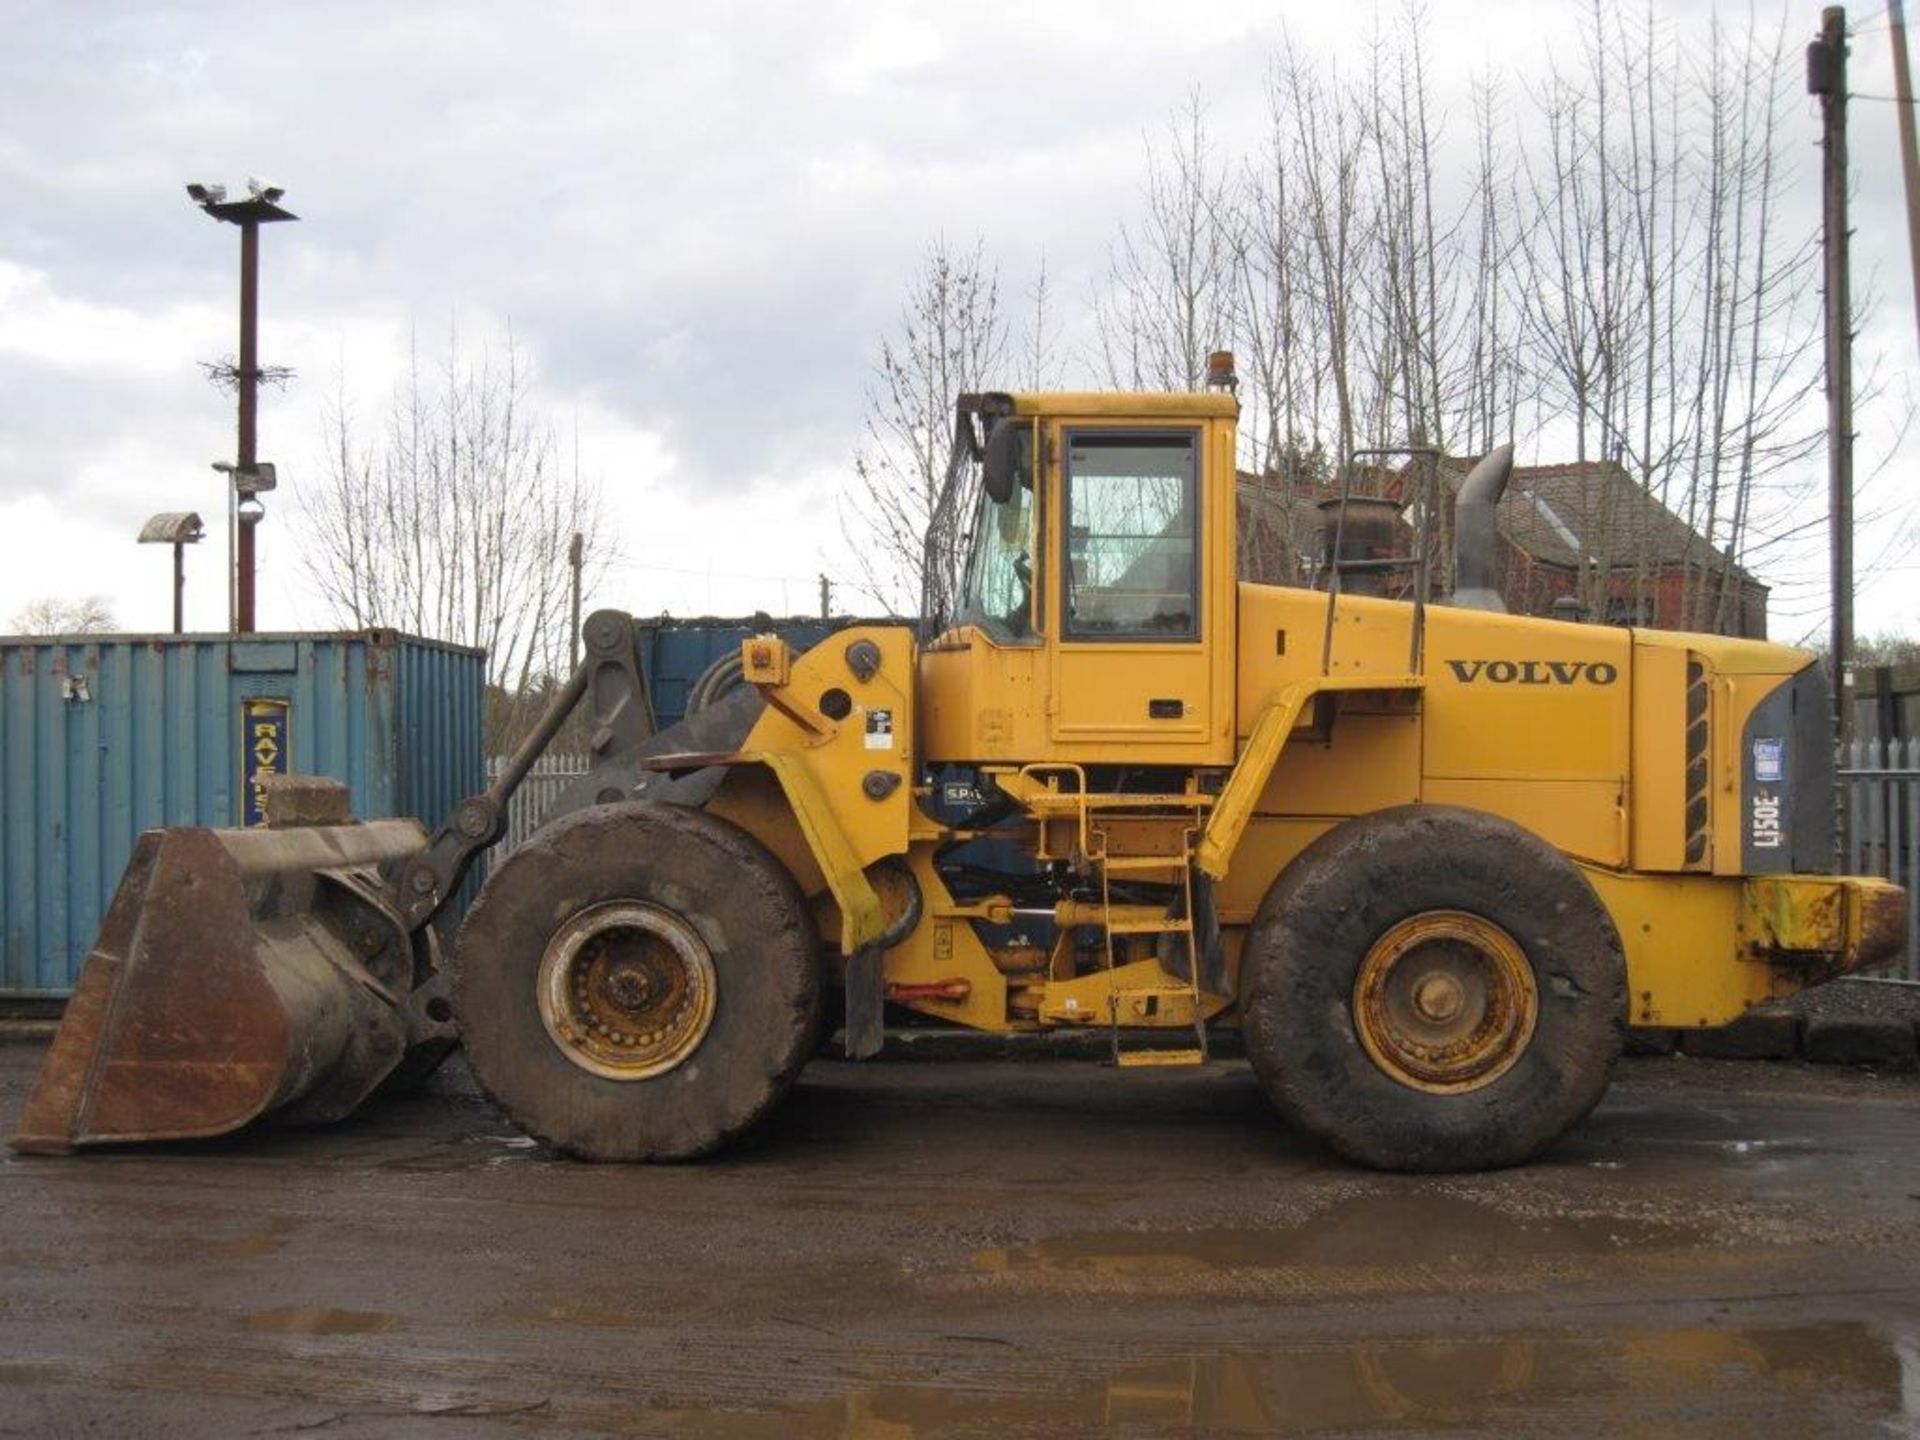 Volvo L150e Loading Shovel 2005, very good condition, original paint and well maintained - Image 2 of 2